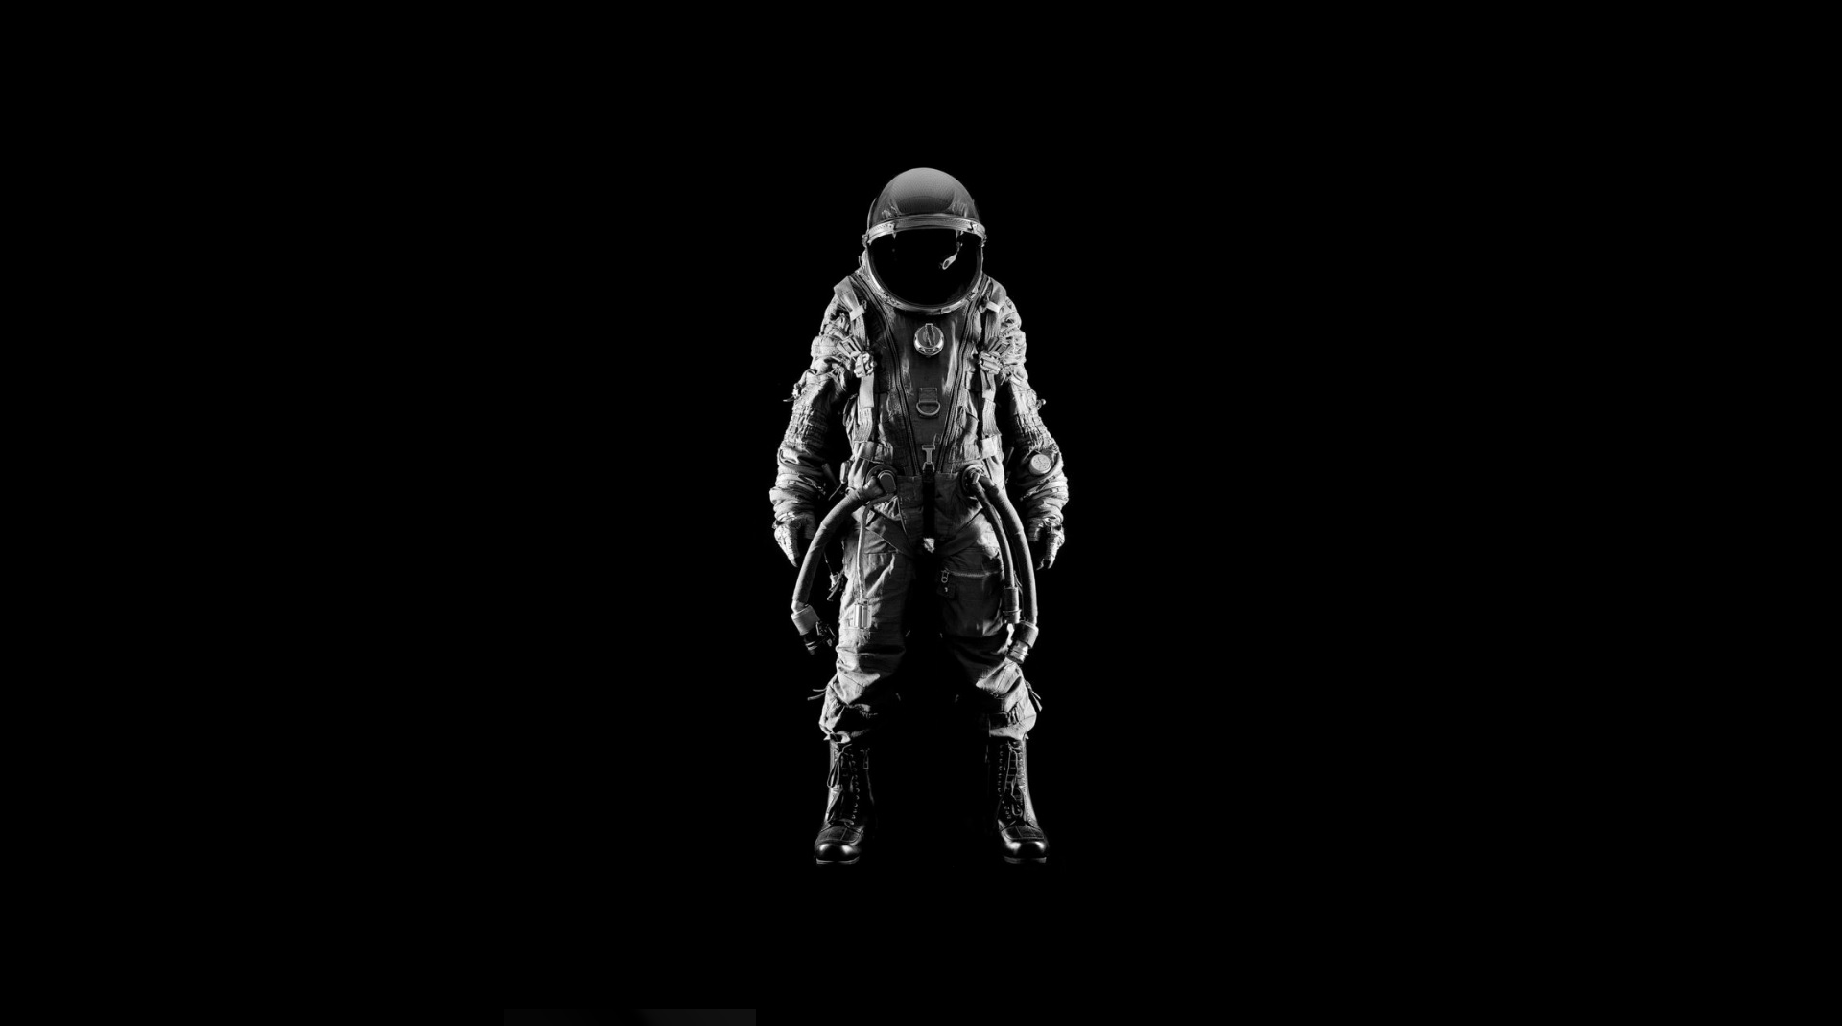 Standing Alone Astronaut Wallpapers